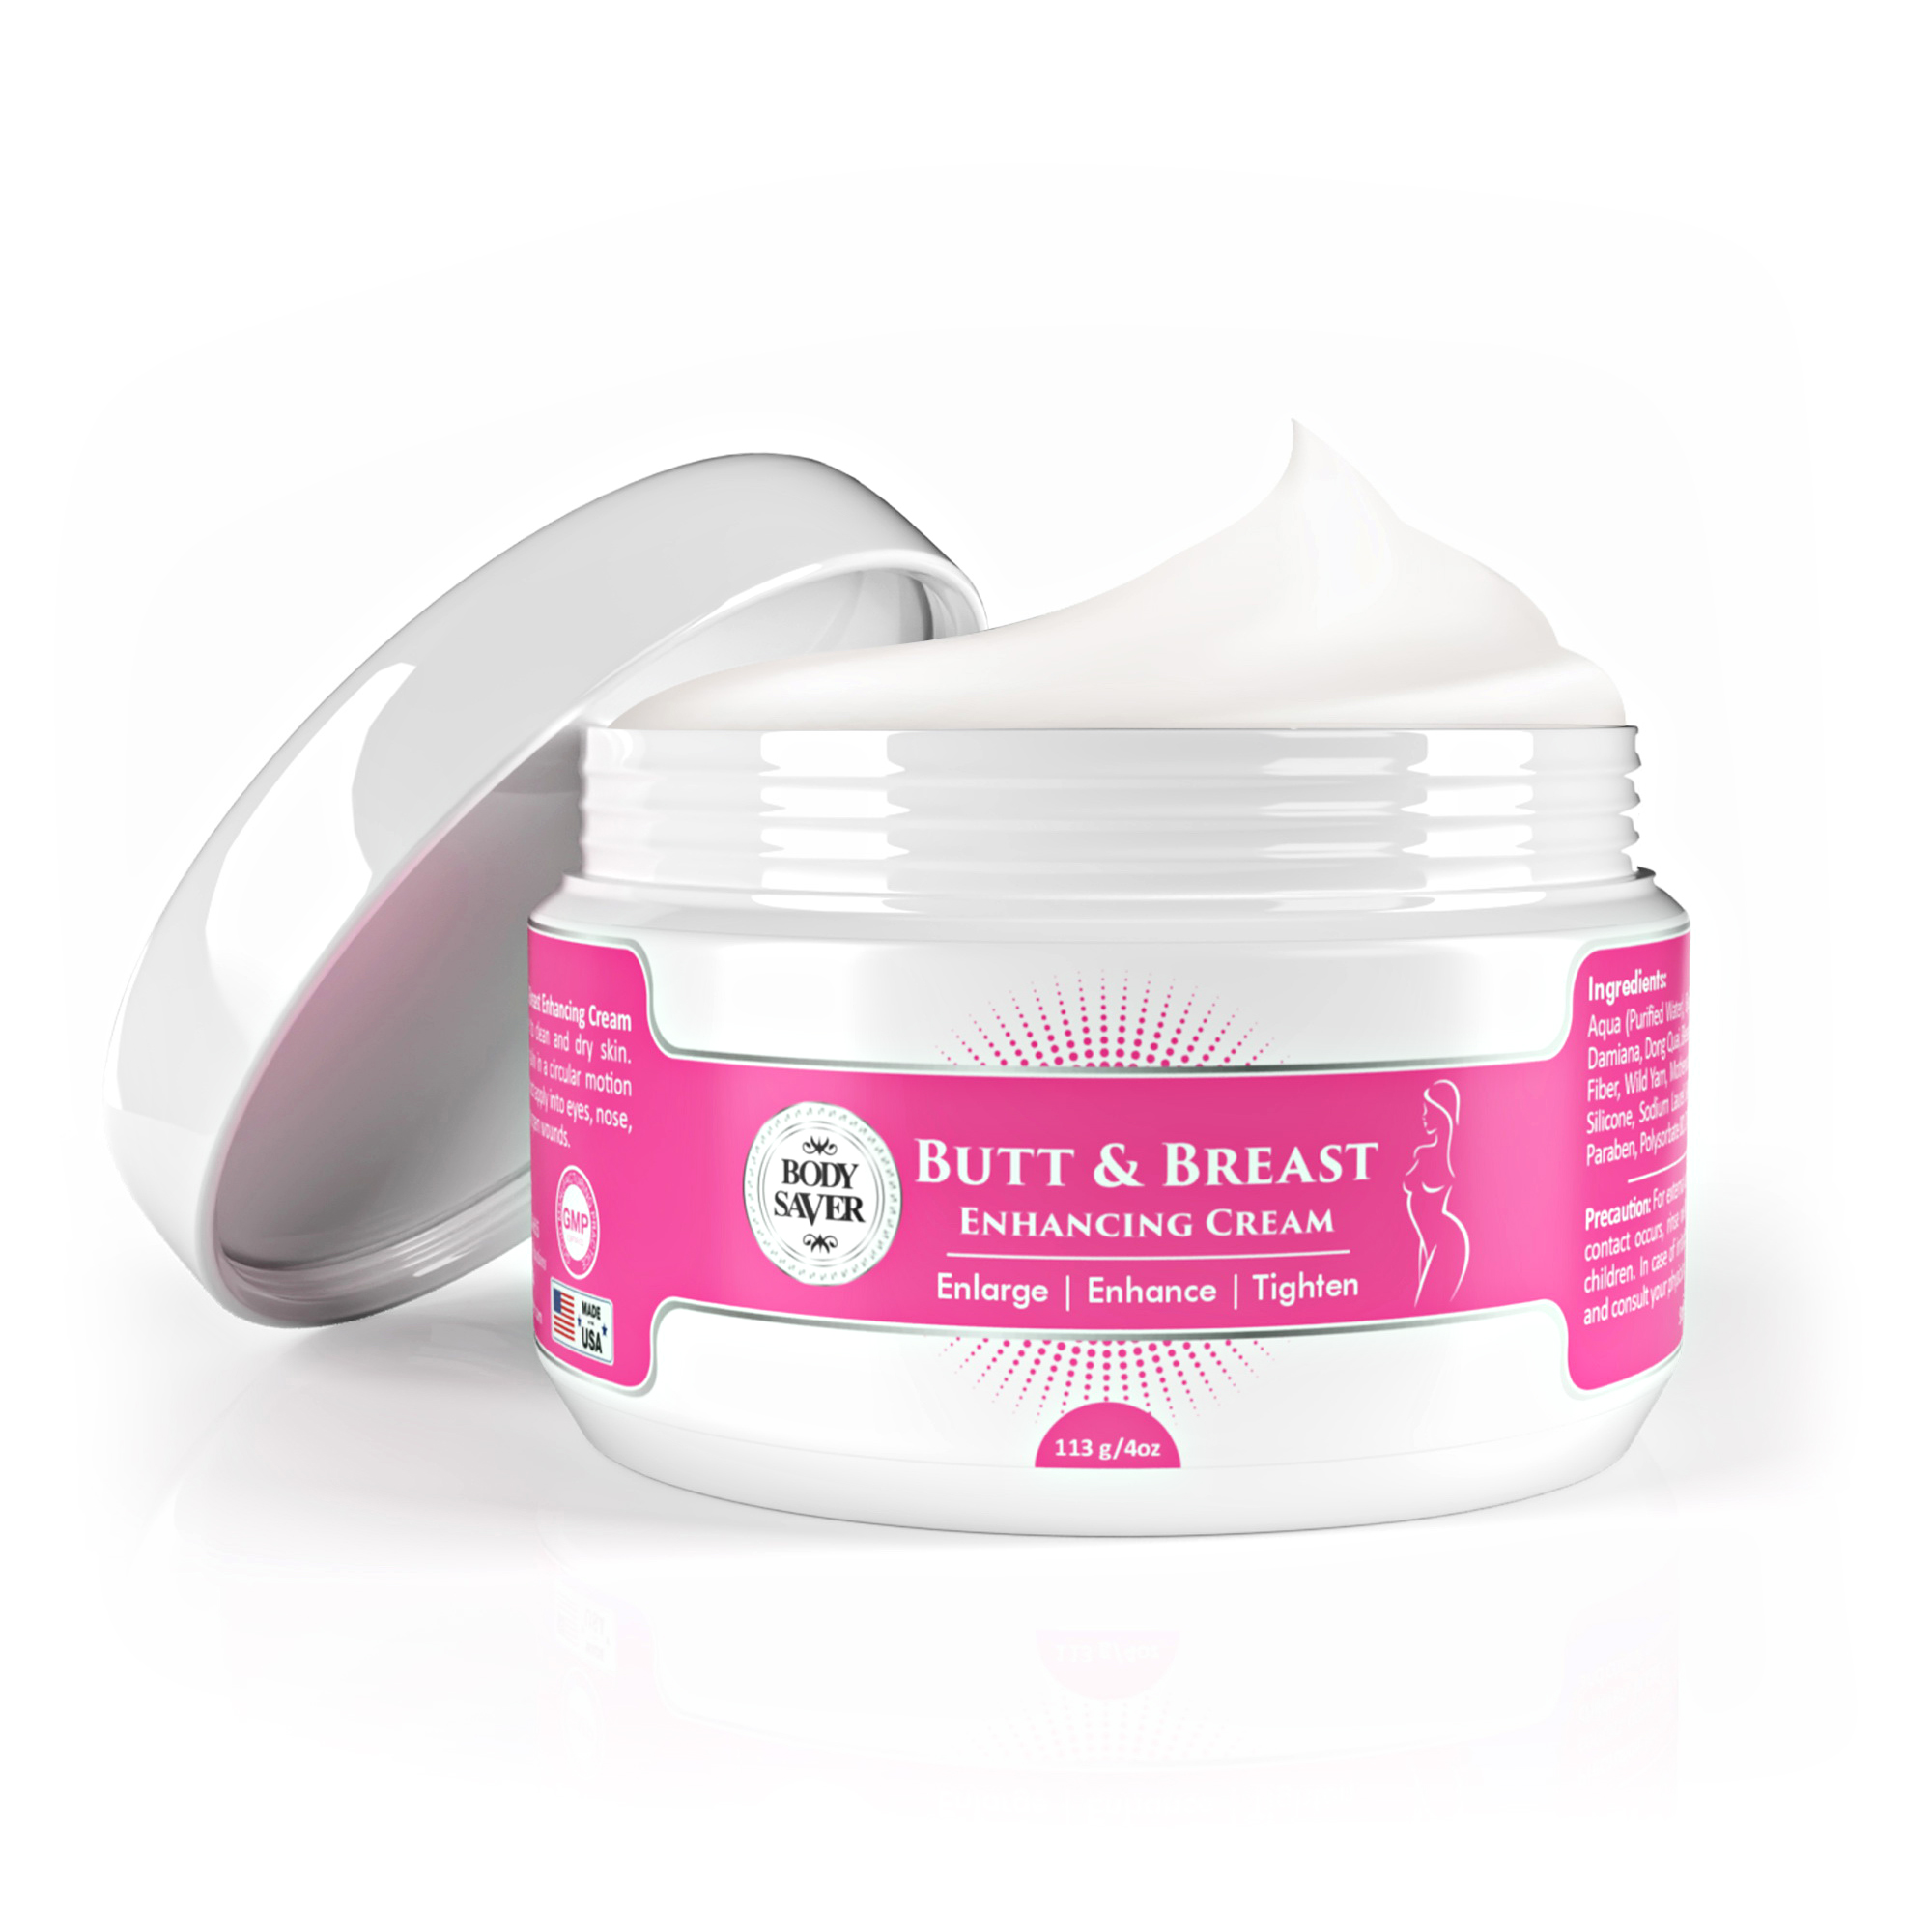 Body Saver Breast And Butt Enhancing Cream